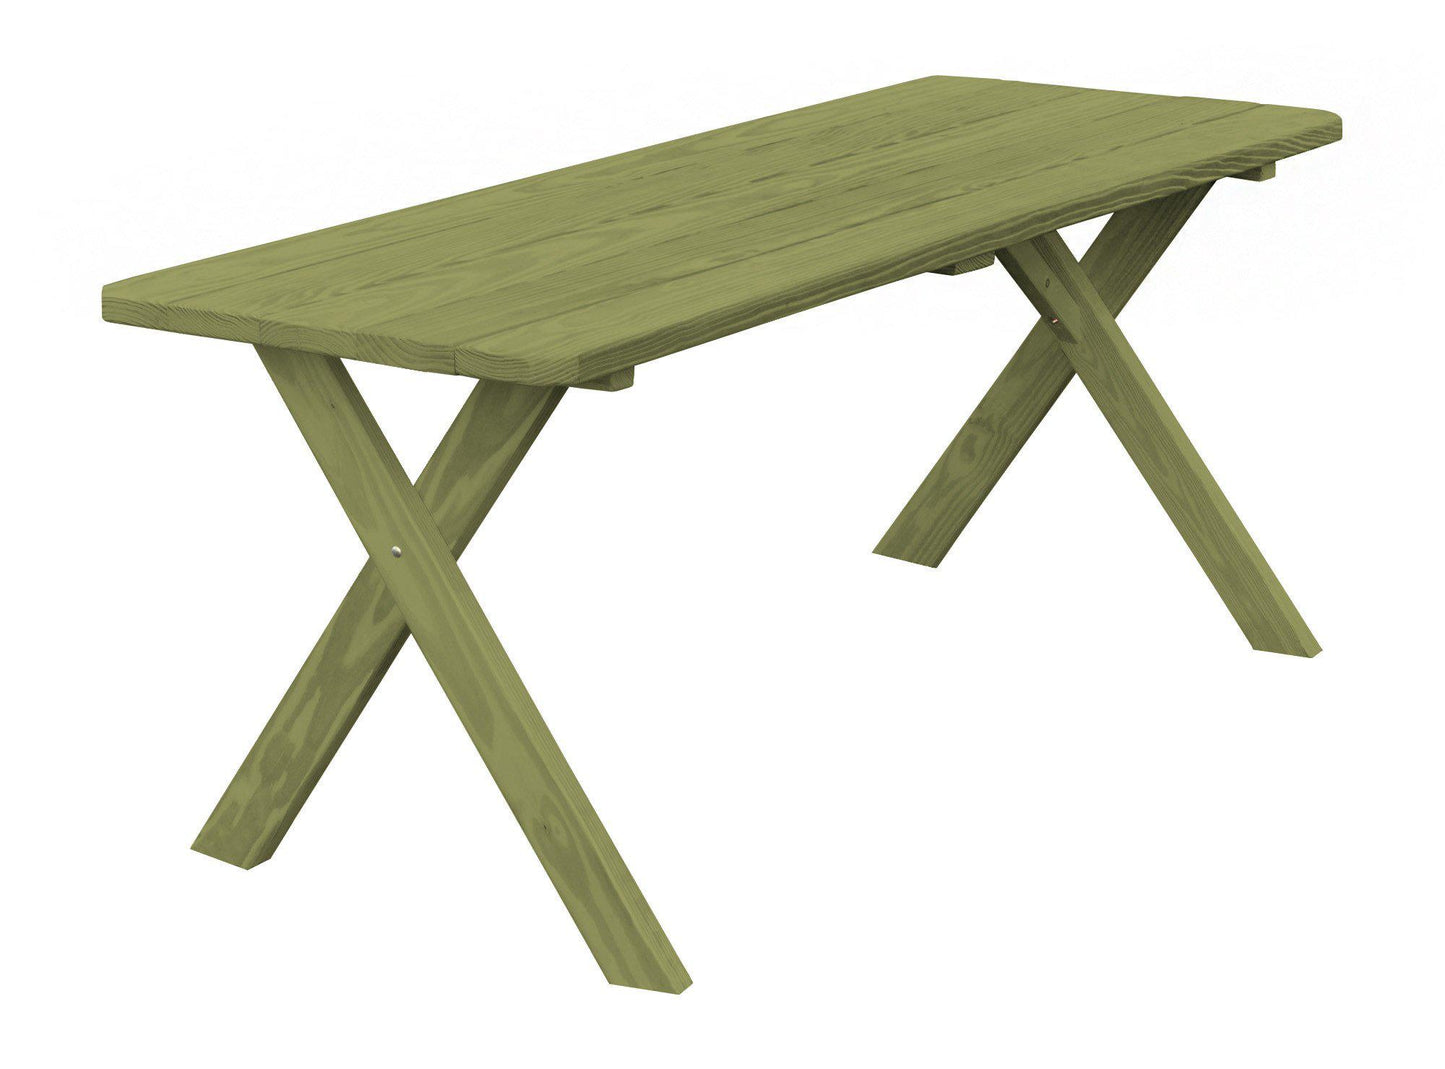 A&L Furniture Co. Pressure Treated Pine 6' Cross-leg Table Only - LEAD TIME TO SHIP 10 BUSINESS DAYS